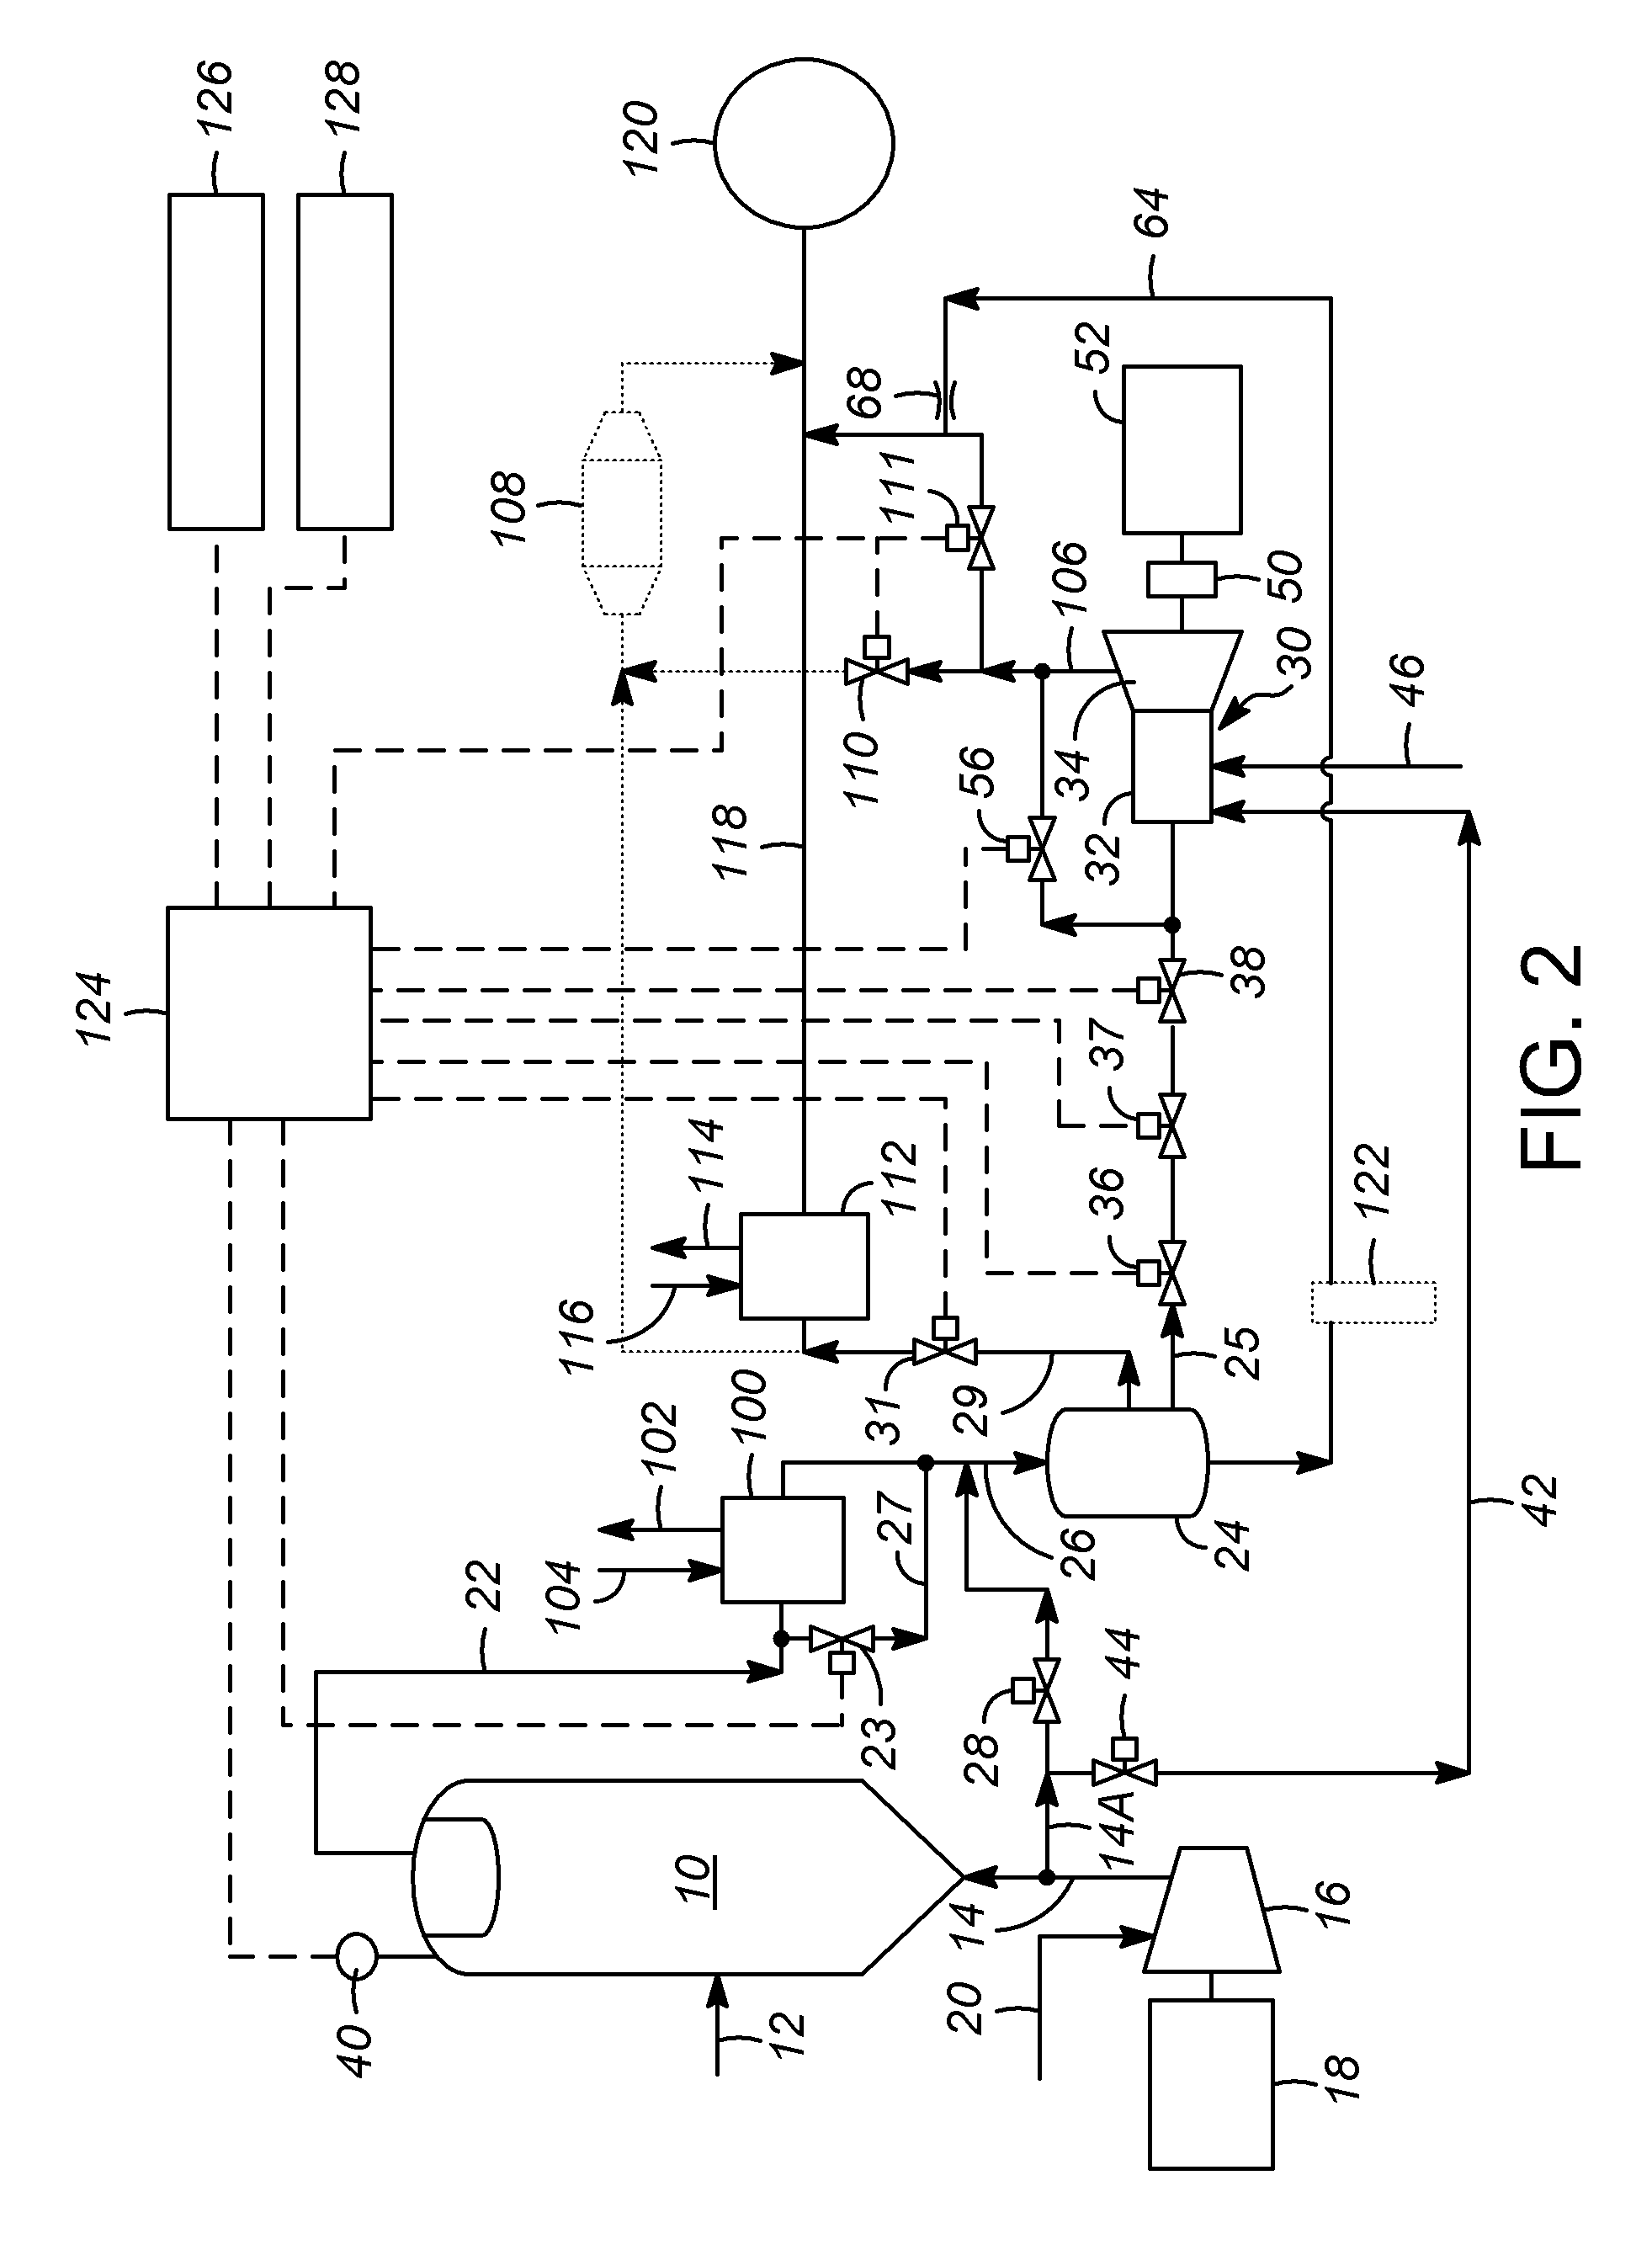 System and process for recovering power and steam from regenerator flue gas